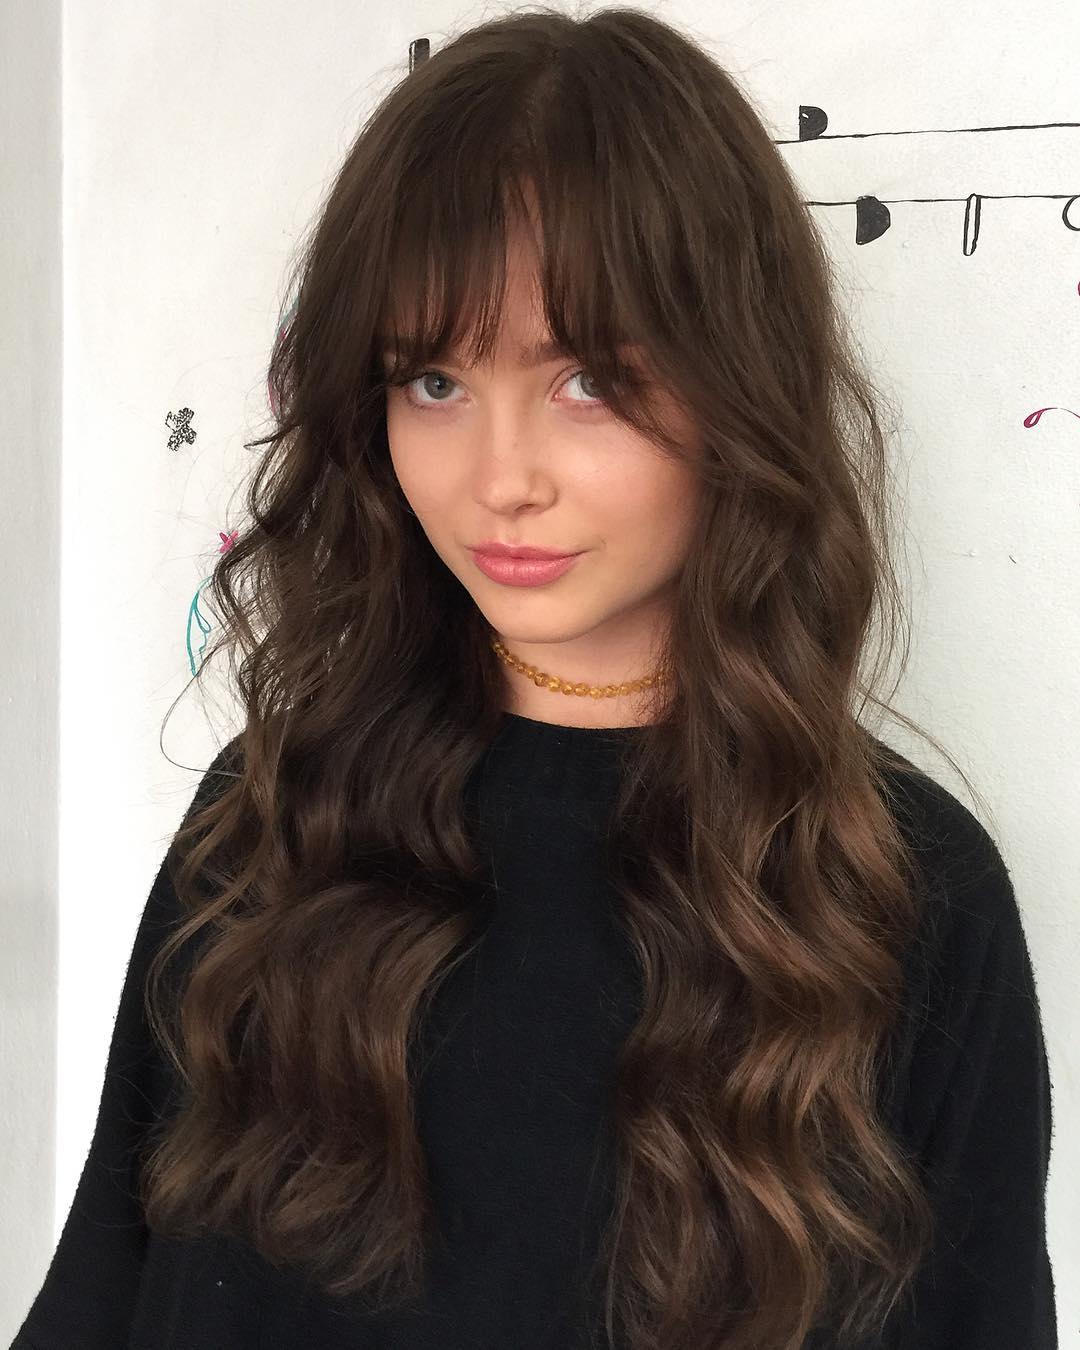 35 Stunning Long Haircuts for Women to Try in 2023